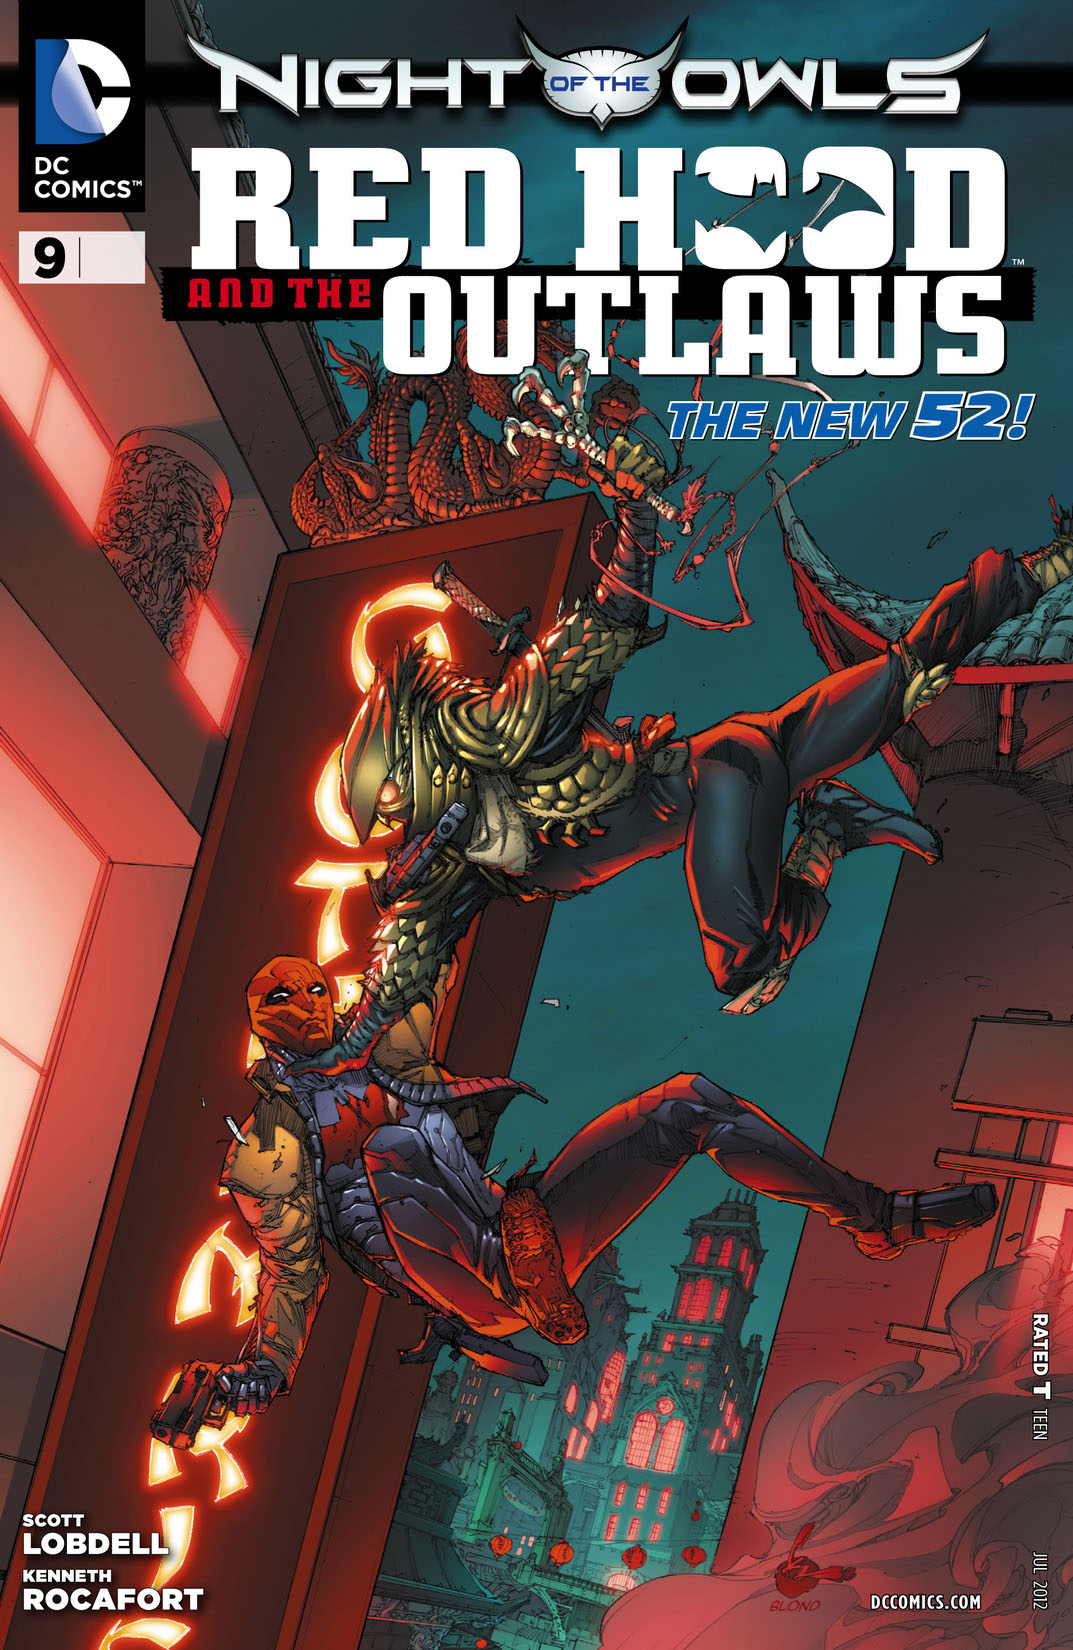 Red Hood and the Outlaws (2011-) #9 preview images